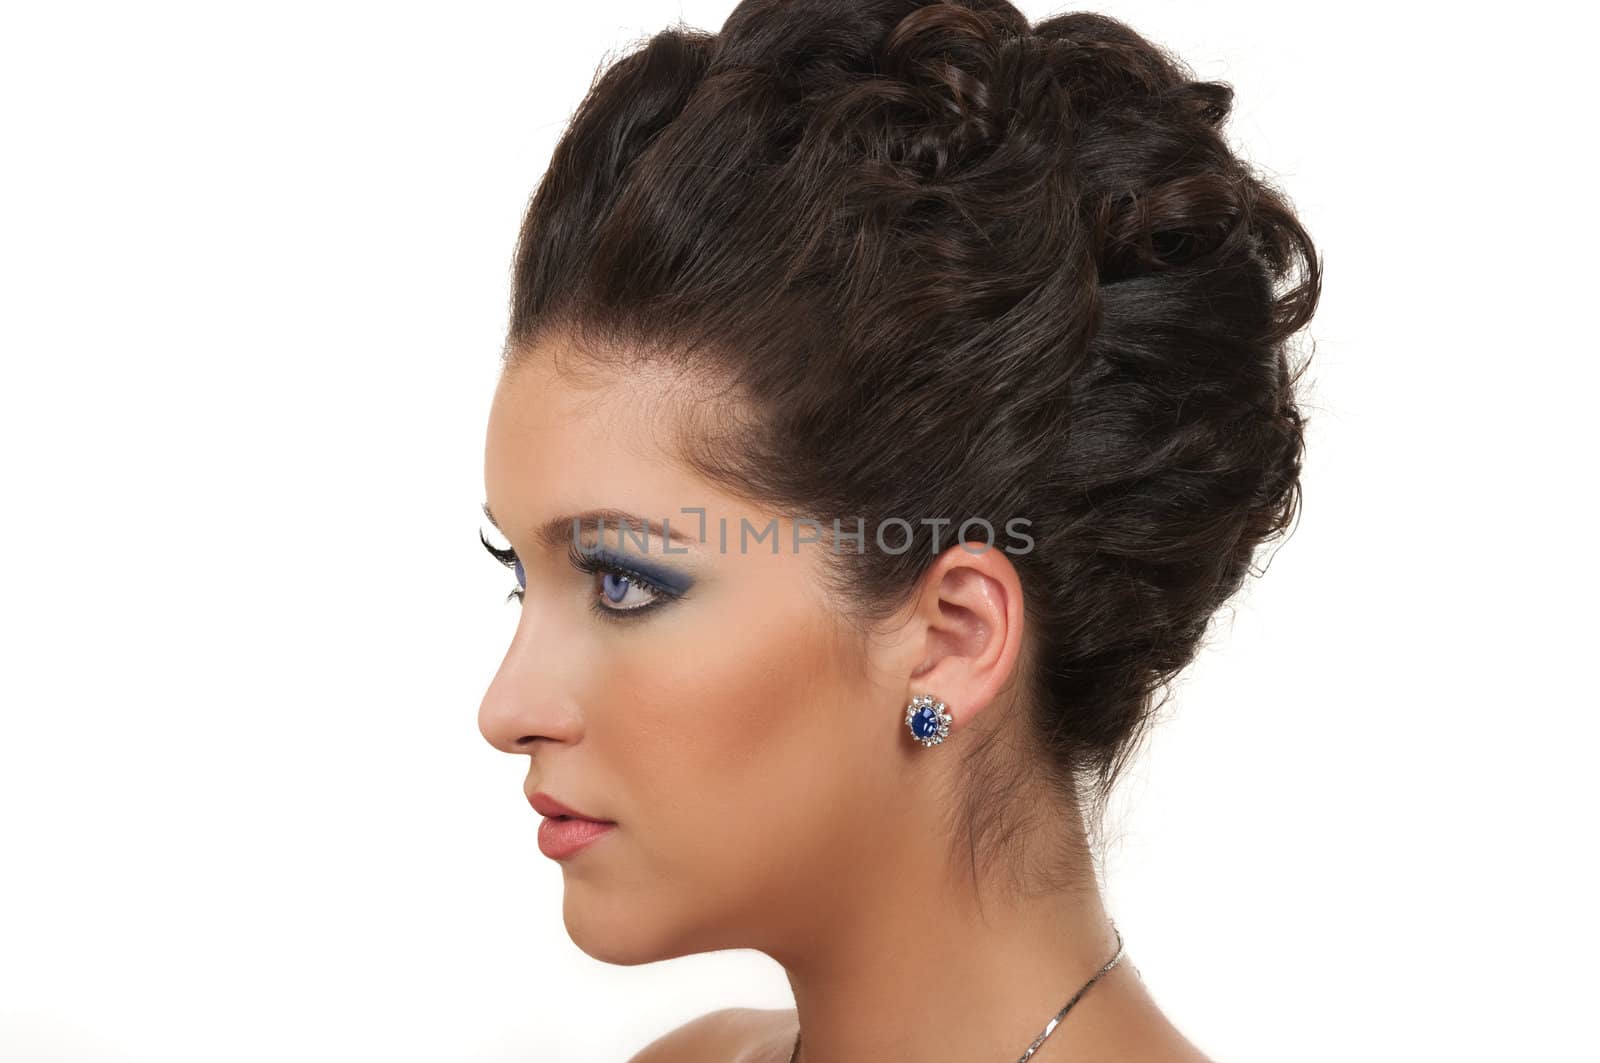 Young woman with beautiful hairstyle, make up and sapphire jewelry